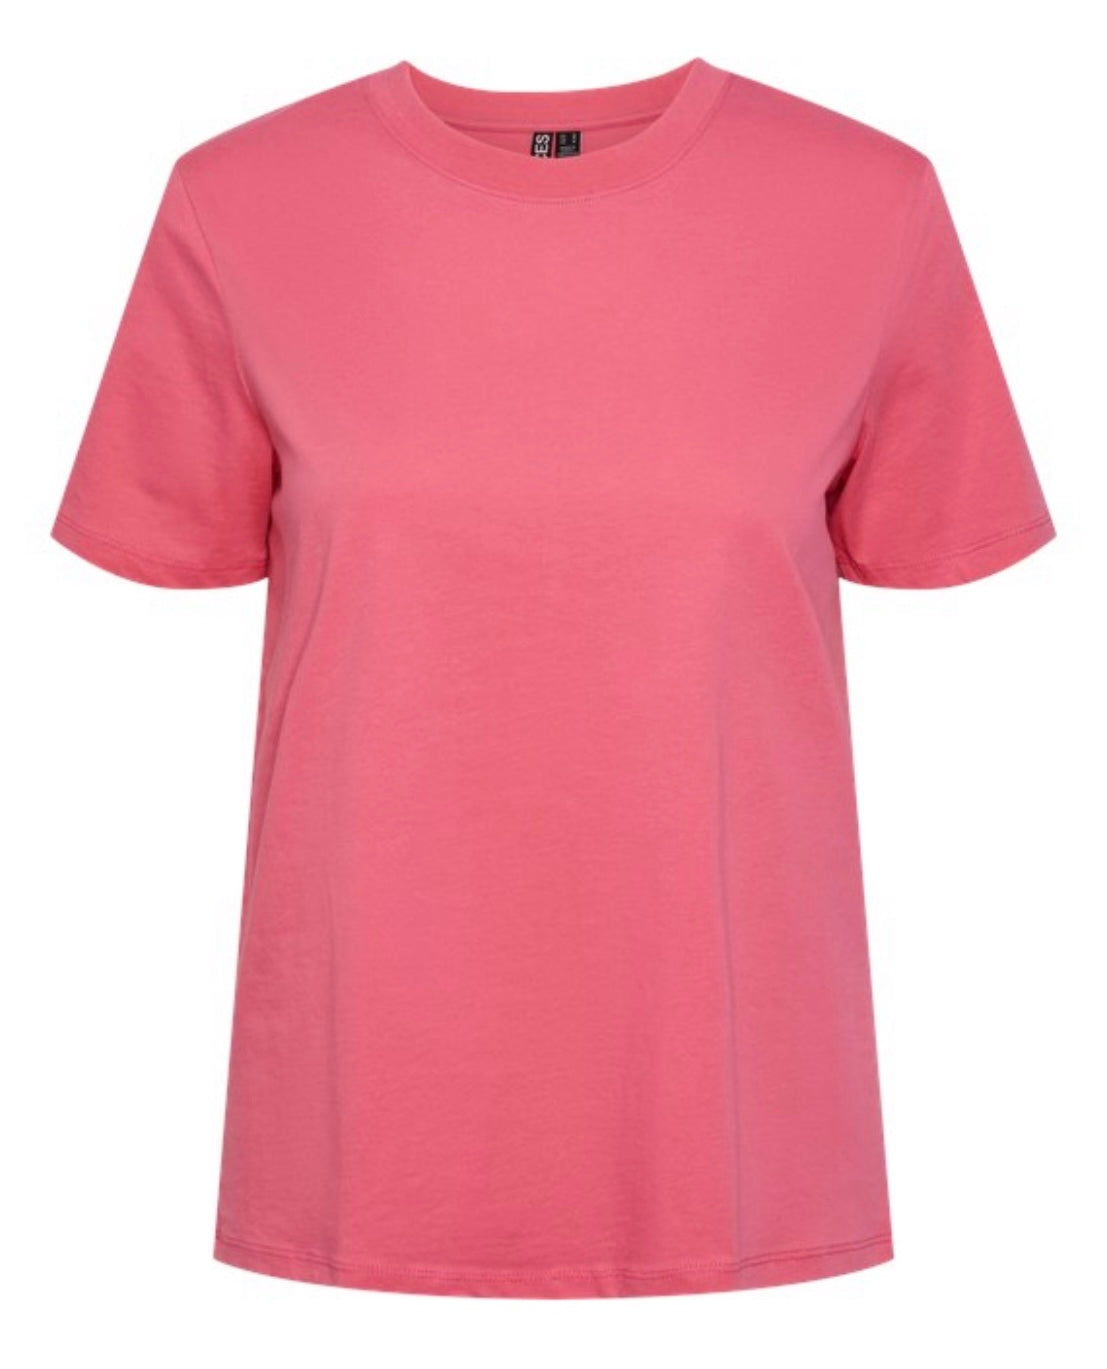 PIECES - RIA SS SOLID TEE - HOT PINK